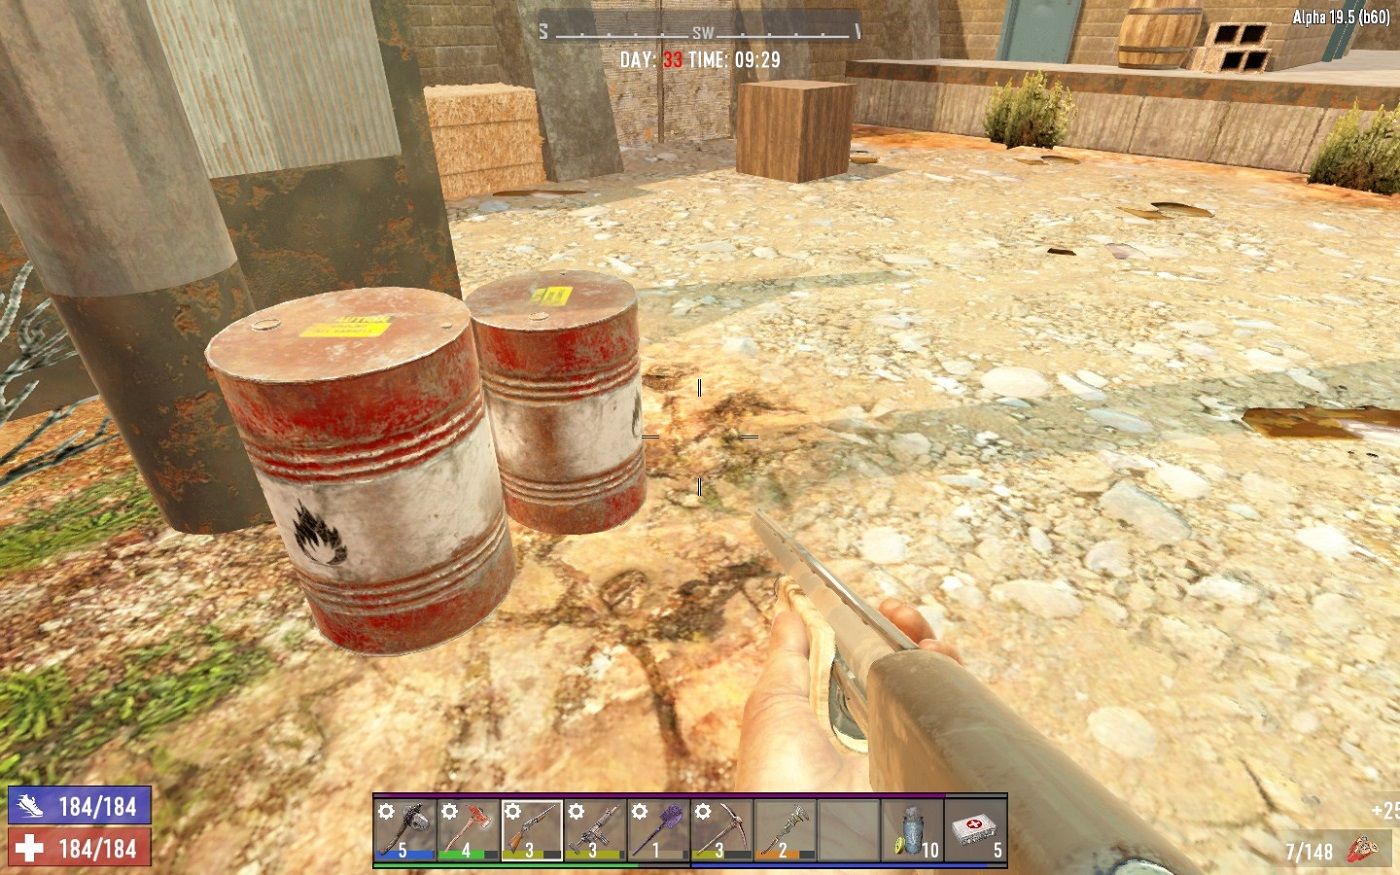 Screenshot from 7 Days to Die showing two explosive red barrels.